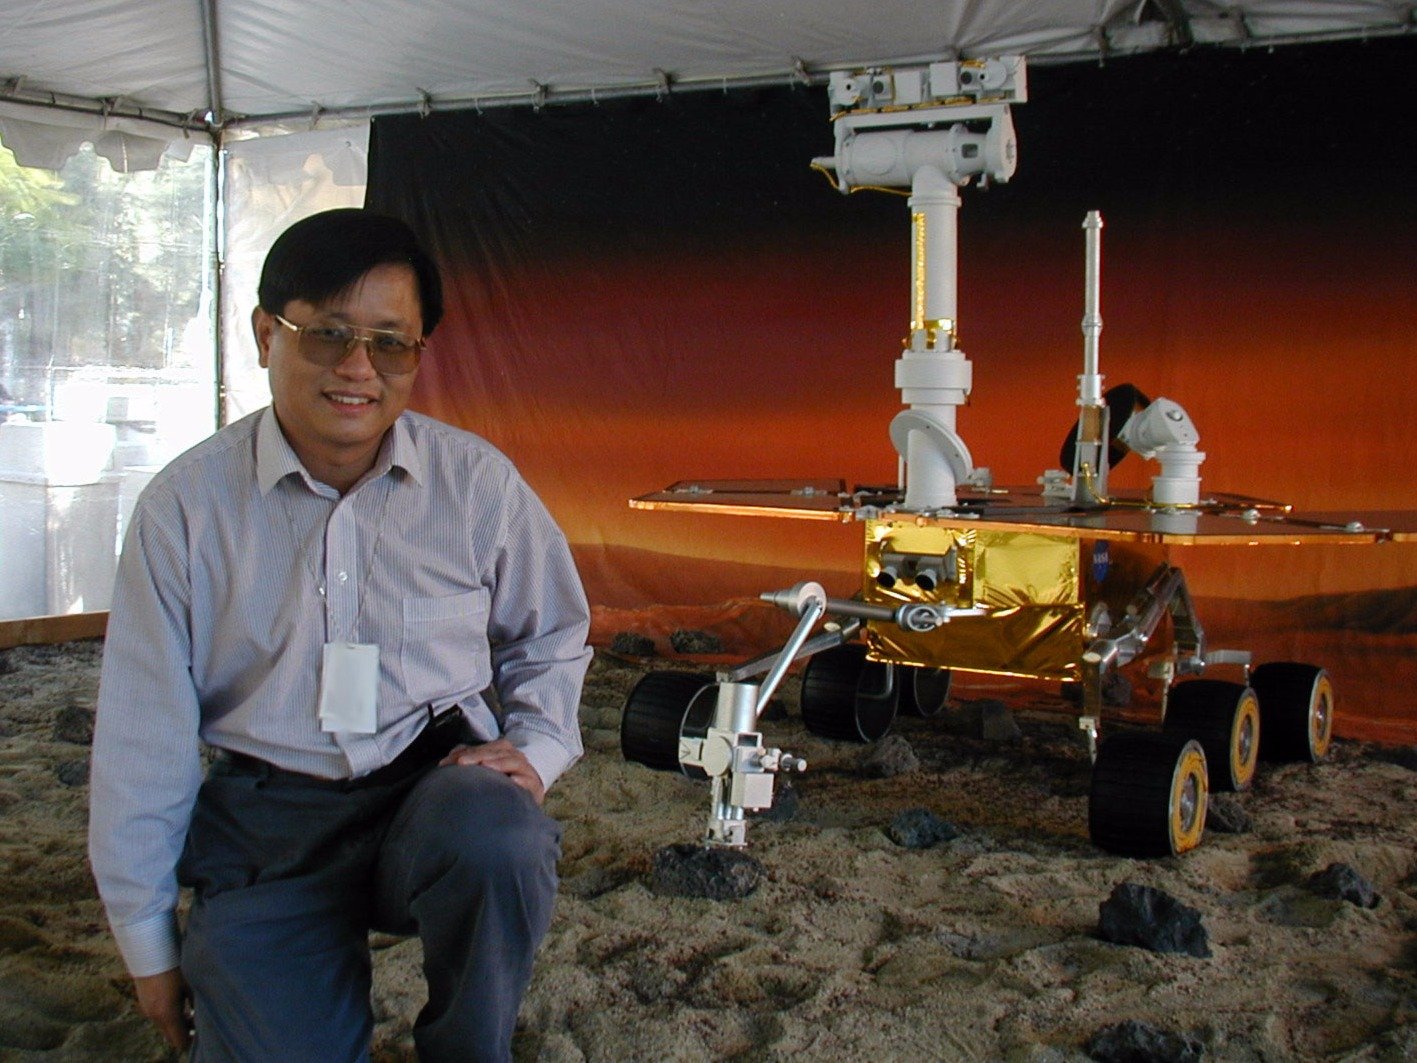 The Chinese Professor, NASA And Space Weapons